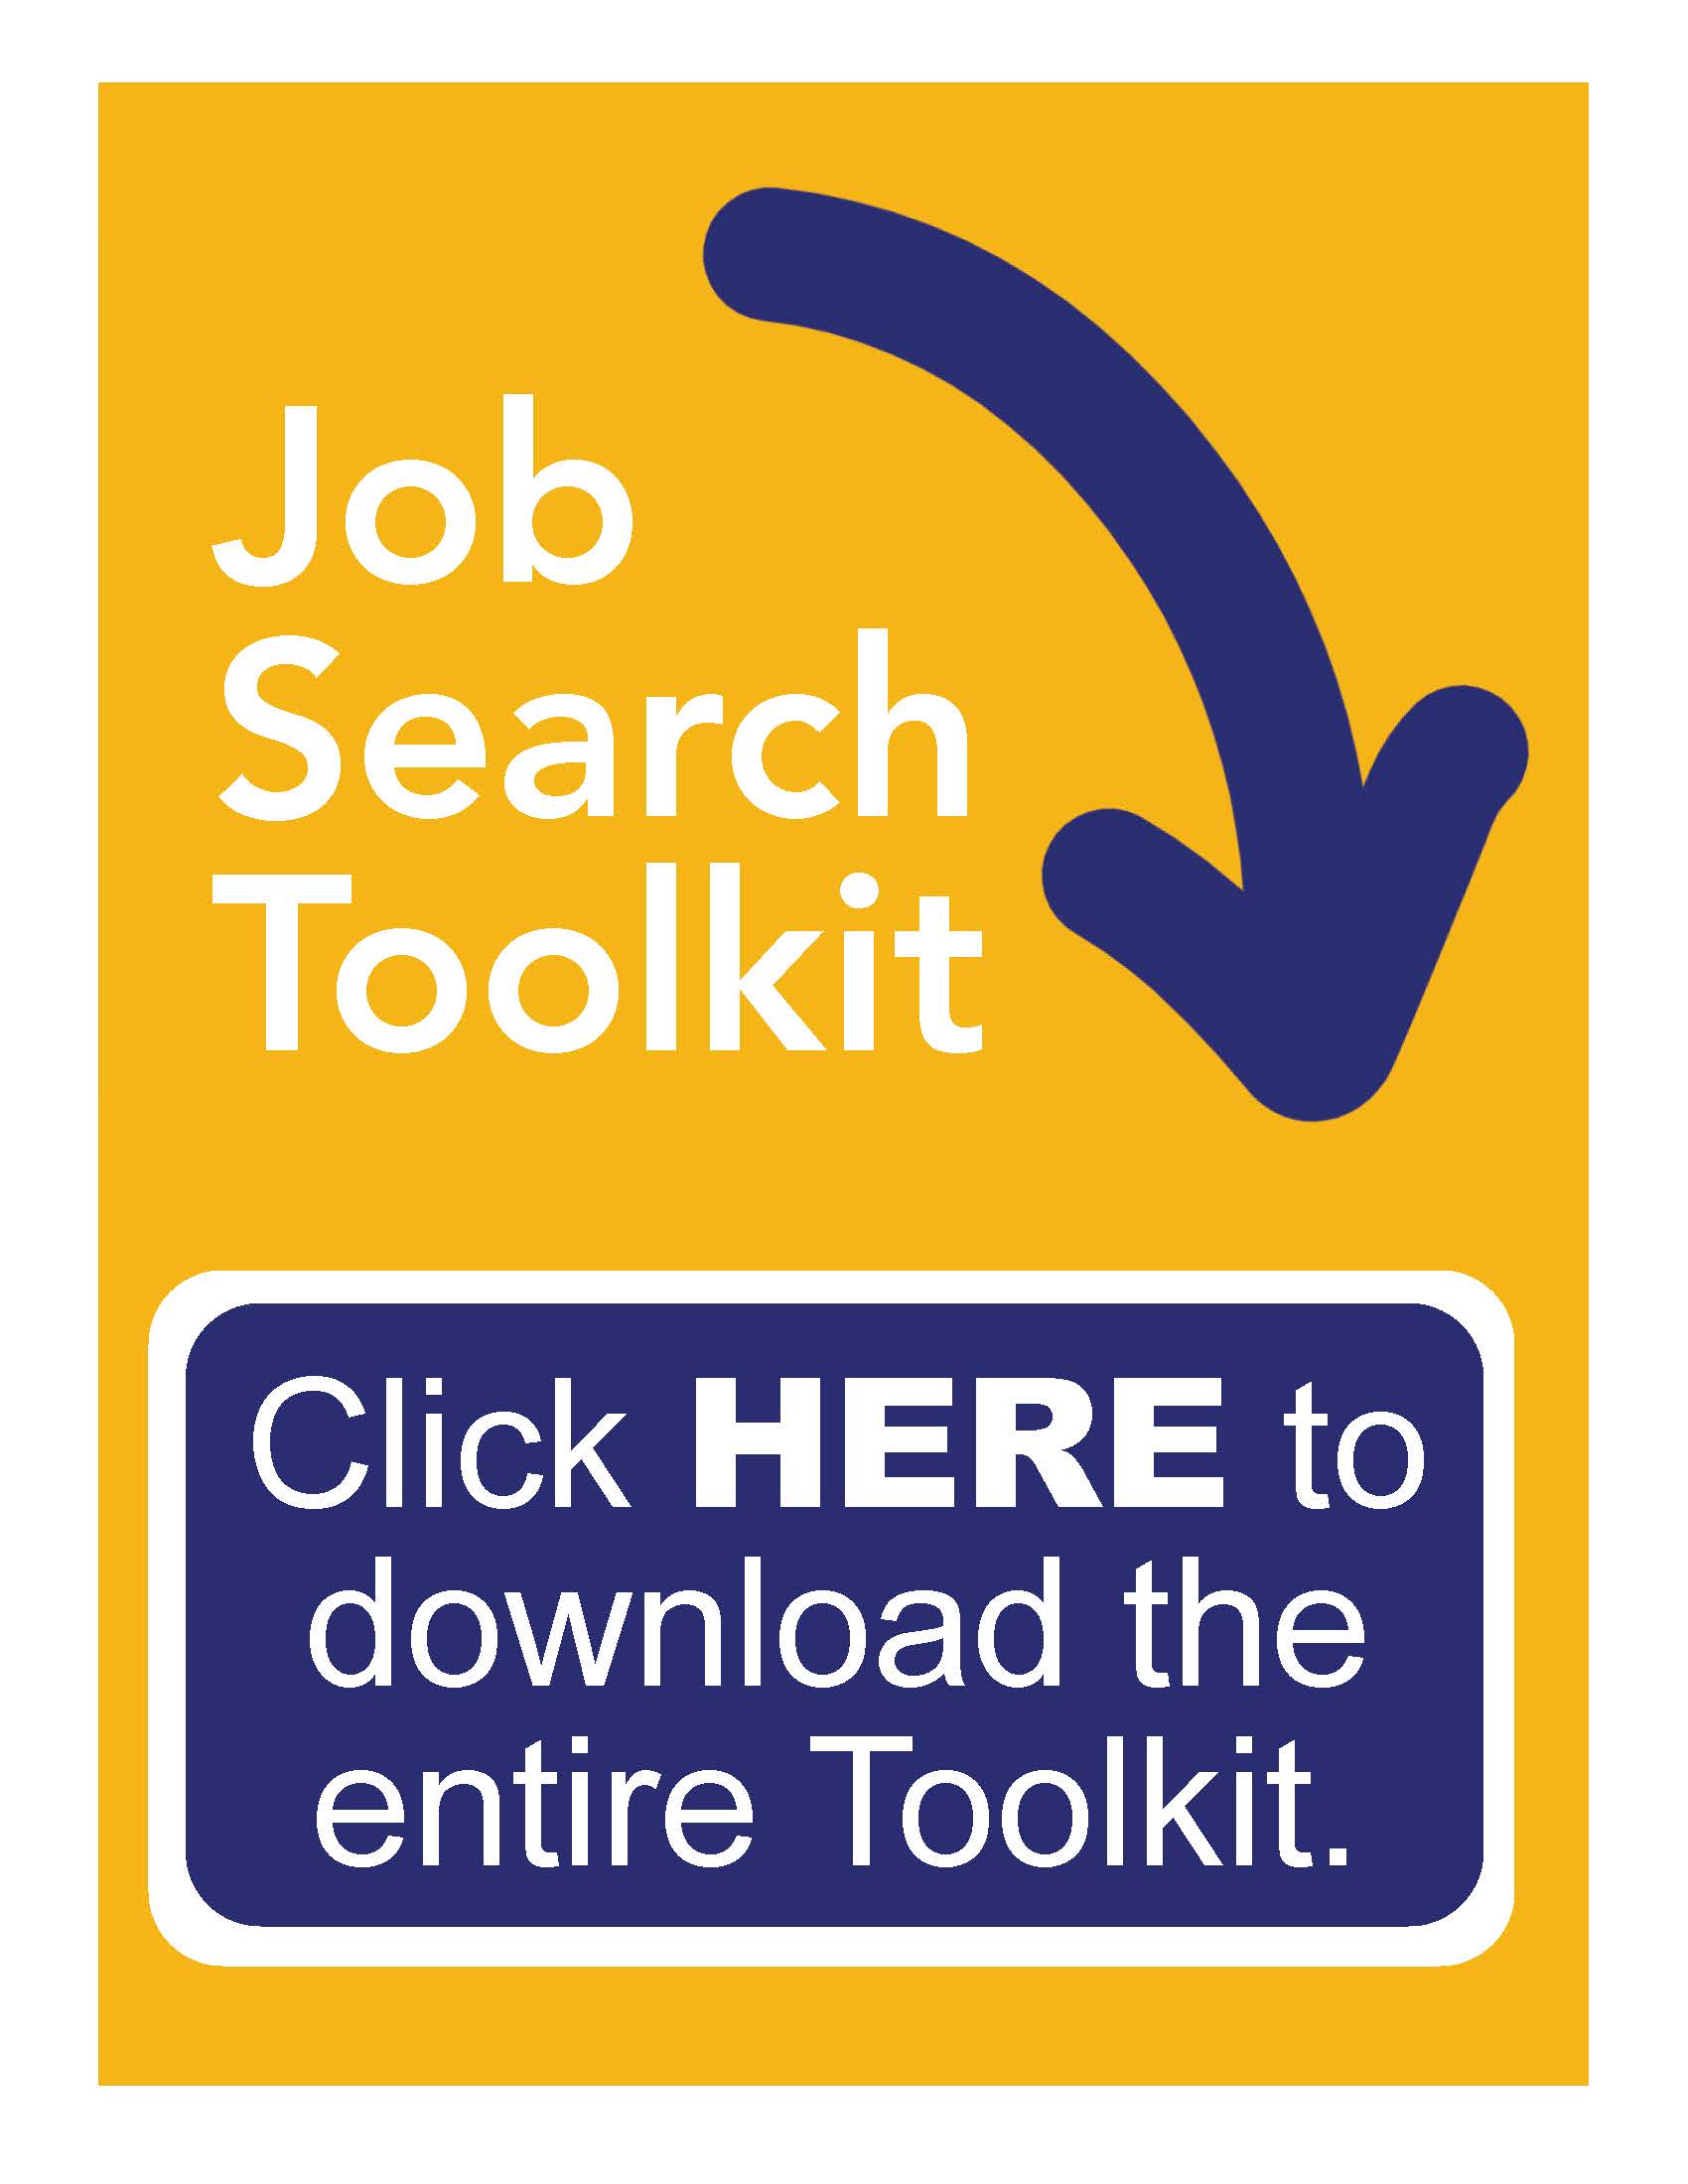 Cover image of Job Search Toolkit click to download